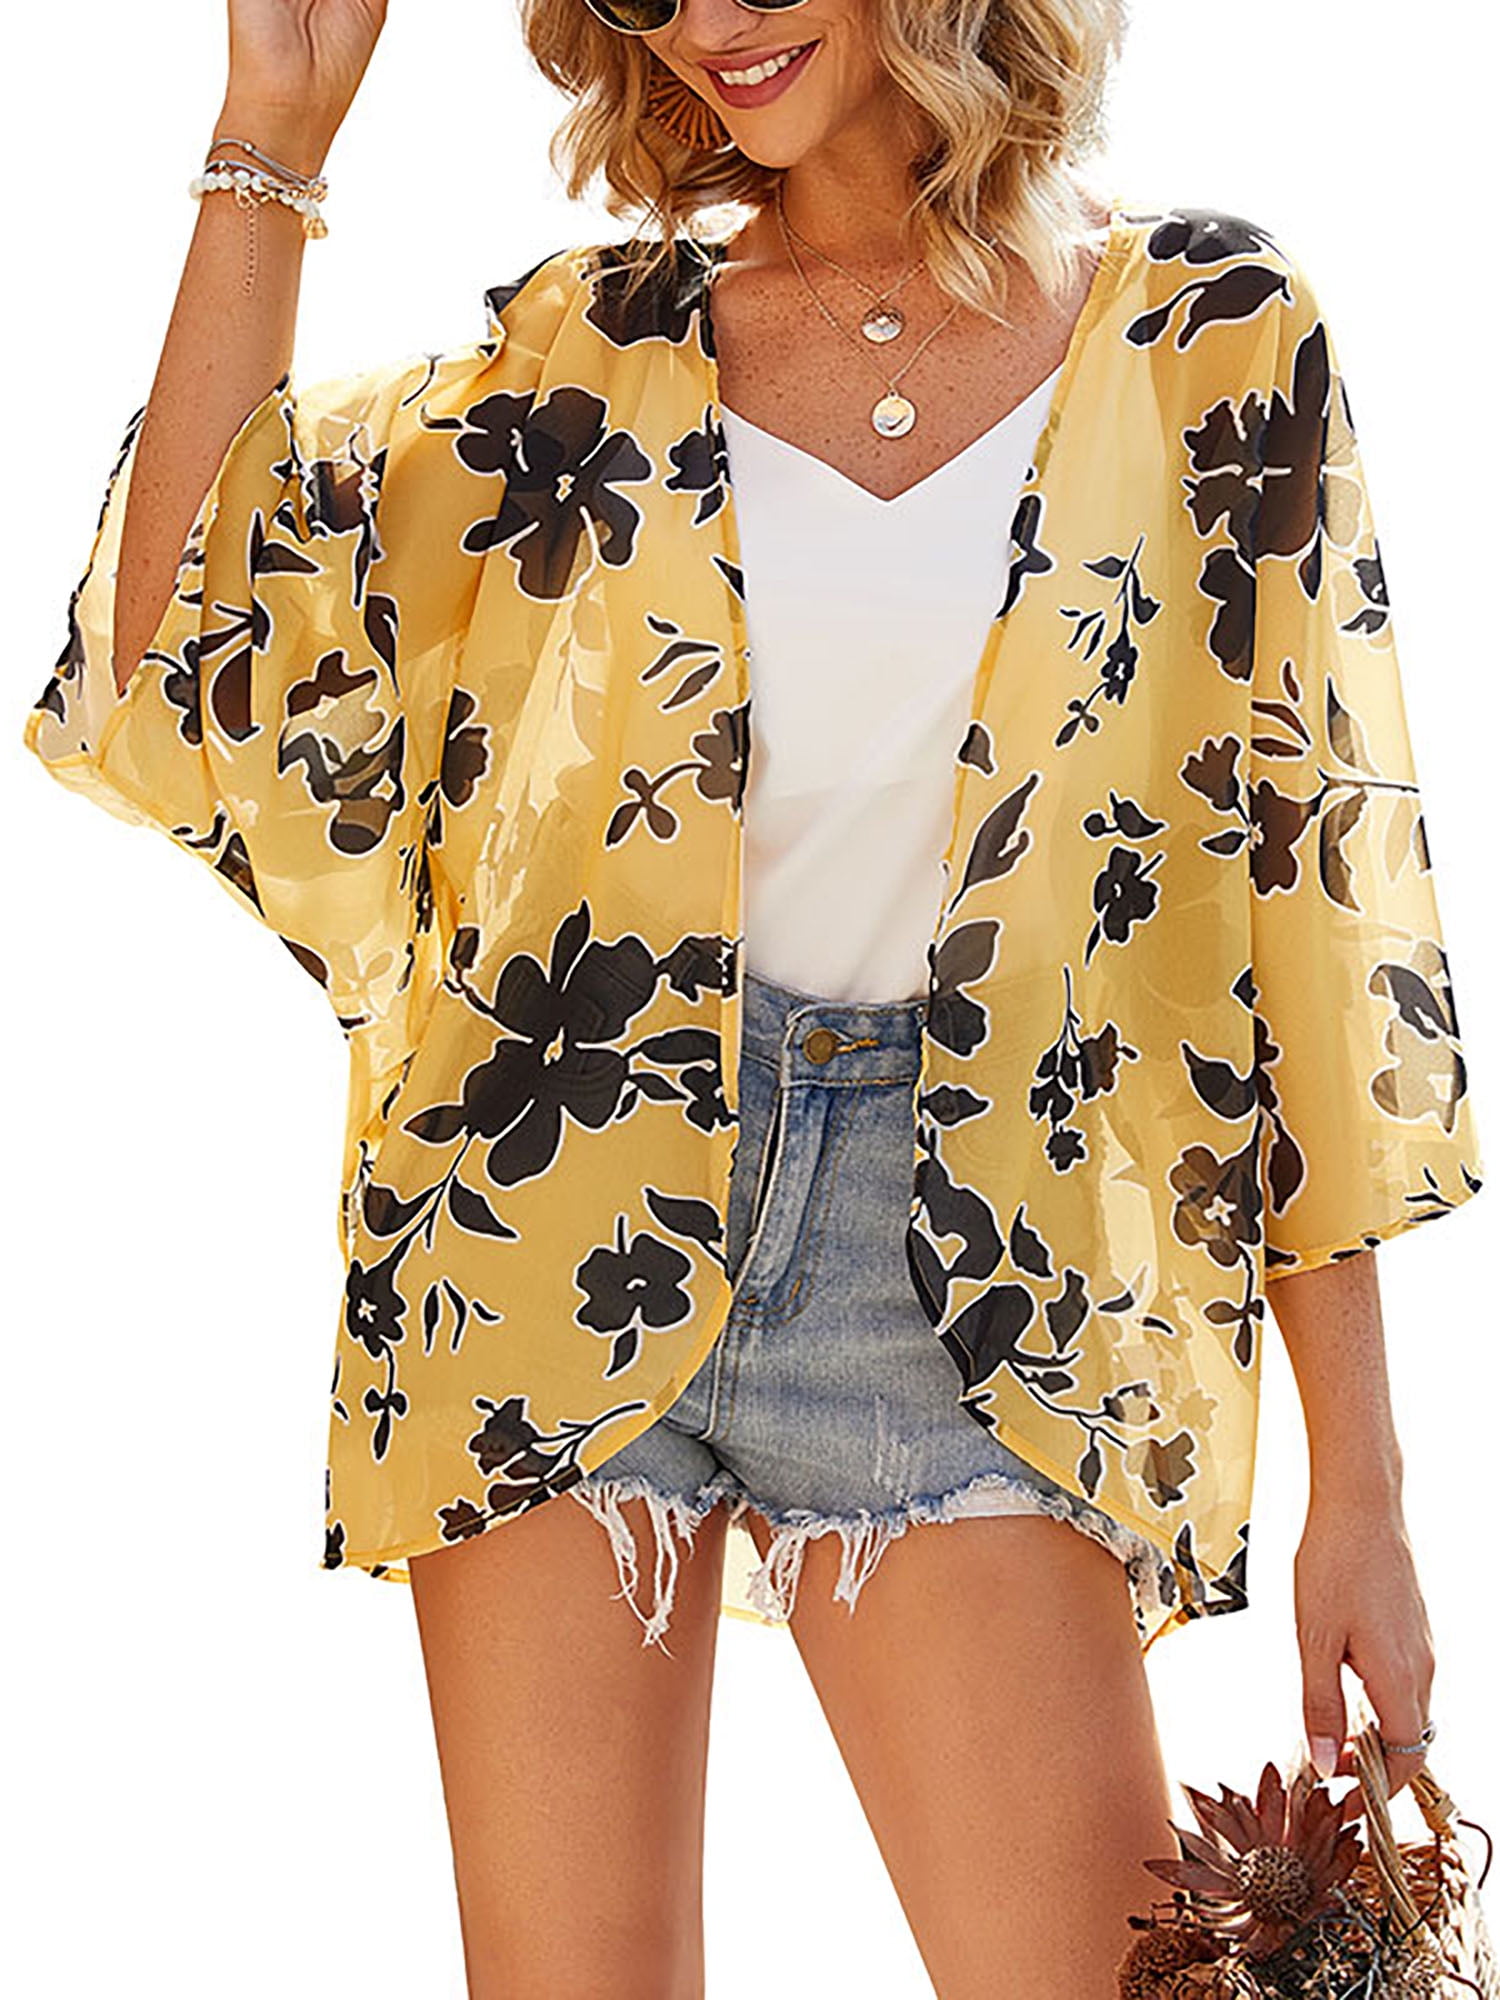 Custom Pattern Swimsuit Cover Up Kimono Cover Up Dress Chiffon Cover Blouse 